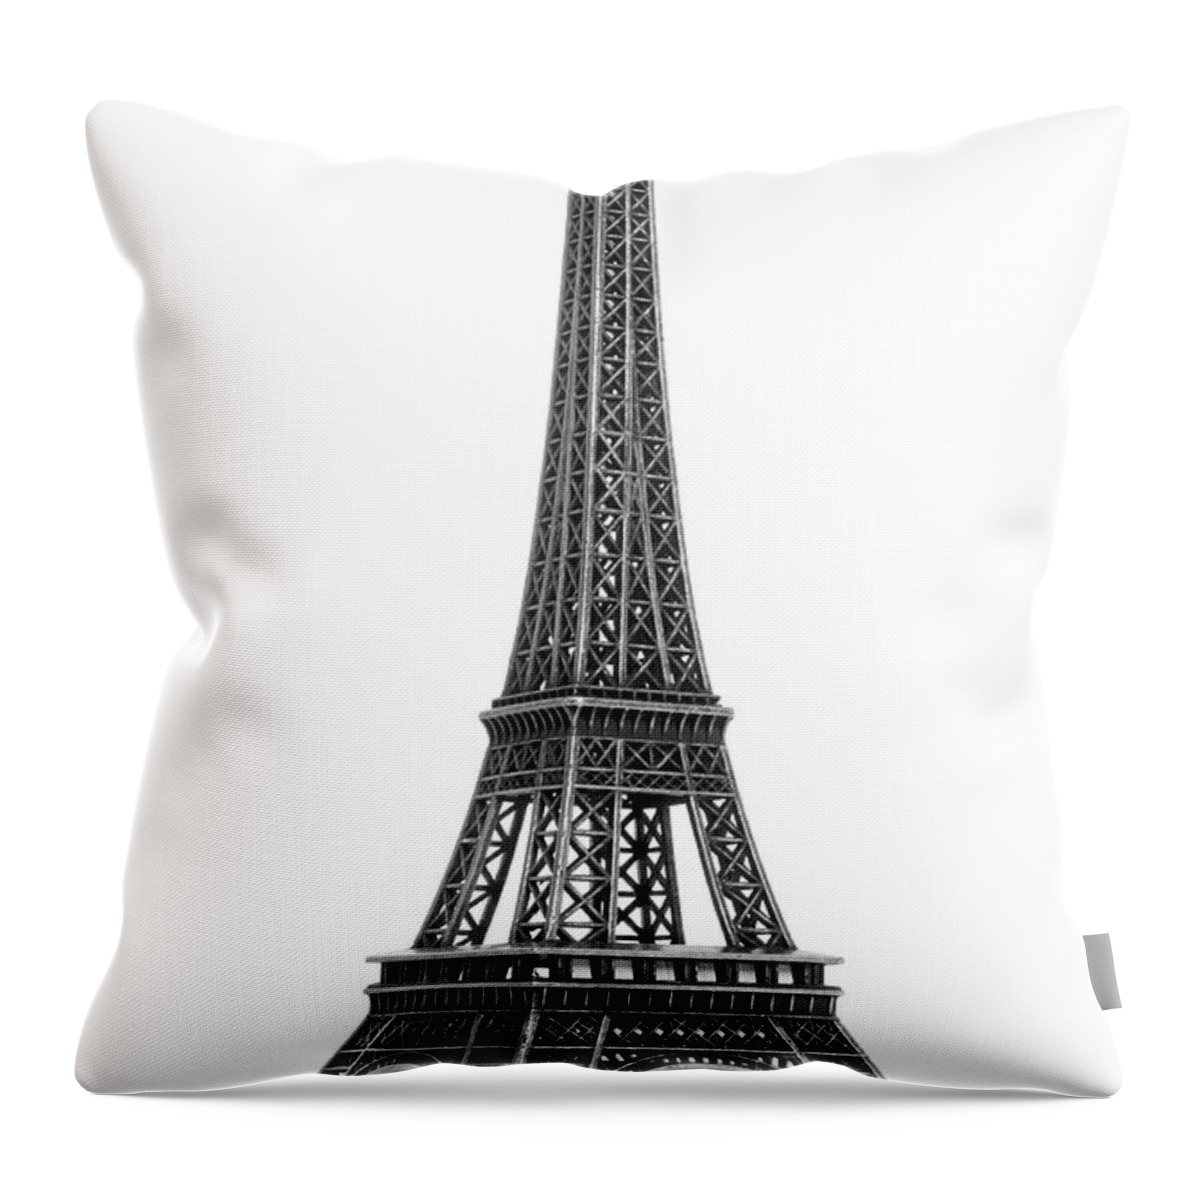 Architectural Model Throw Pillow featuring the photograph Eiffel Tower by Jamesmcq24